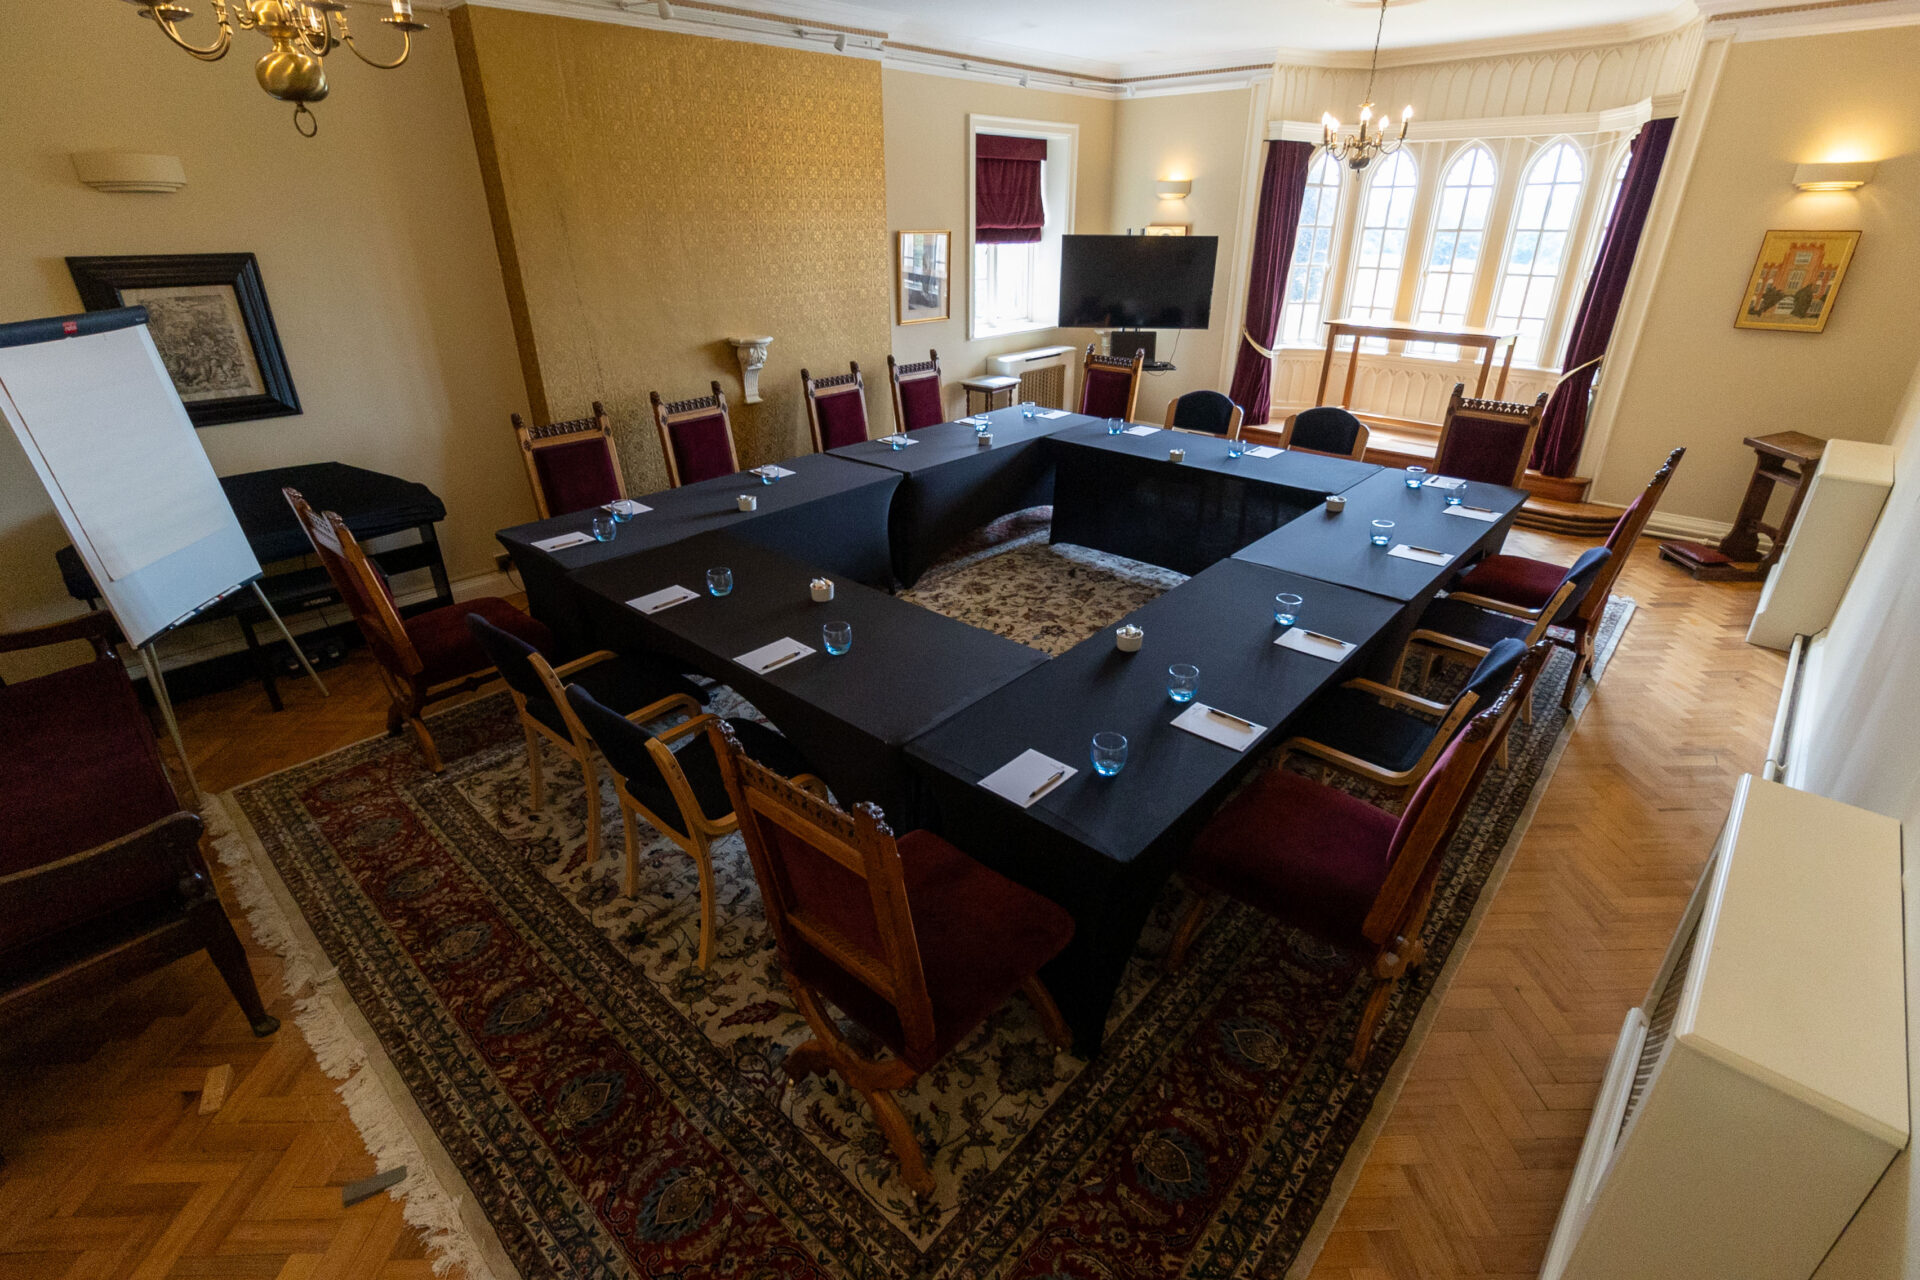 The Cumberland Lodge Chapel set up to seat 16 in a boardroom style